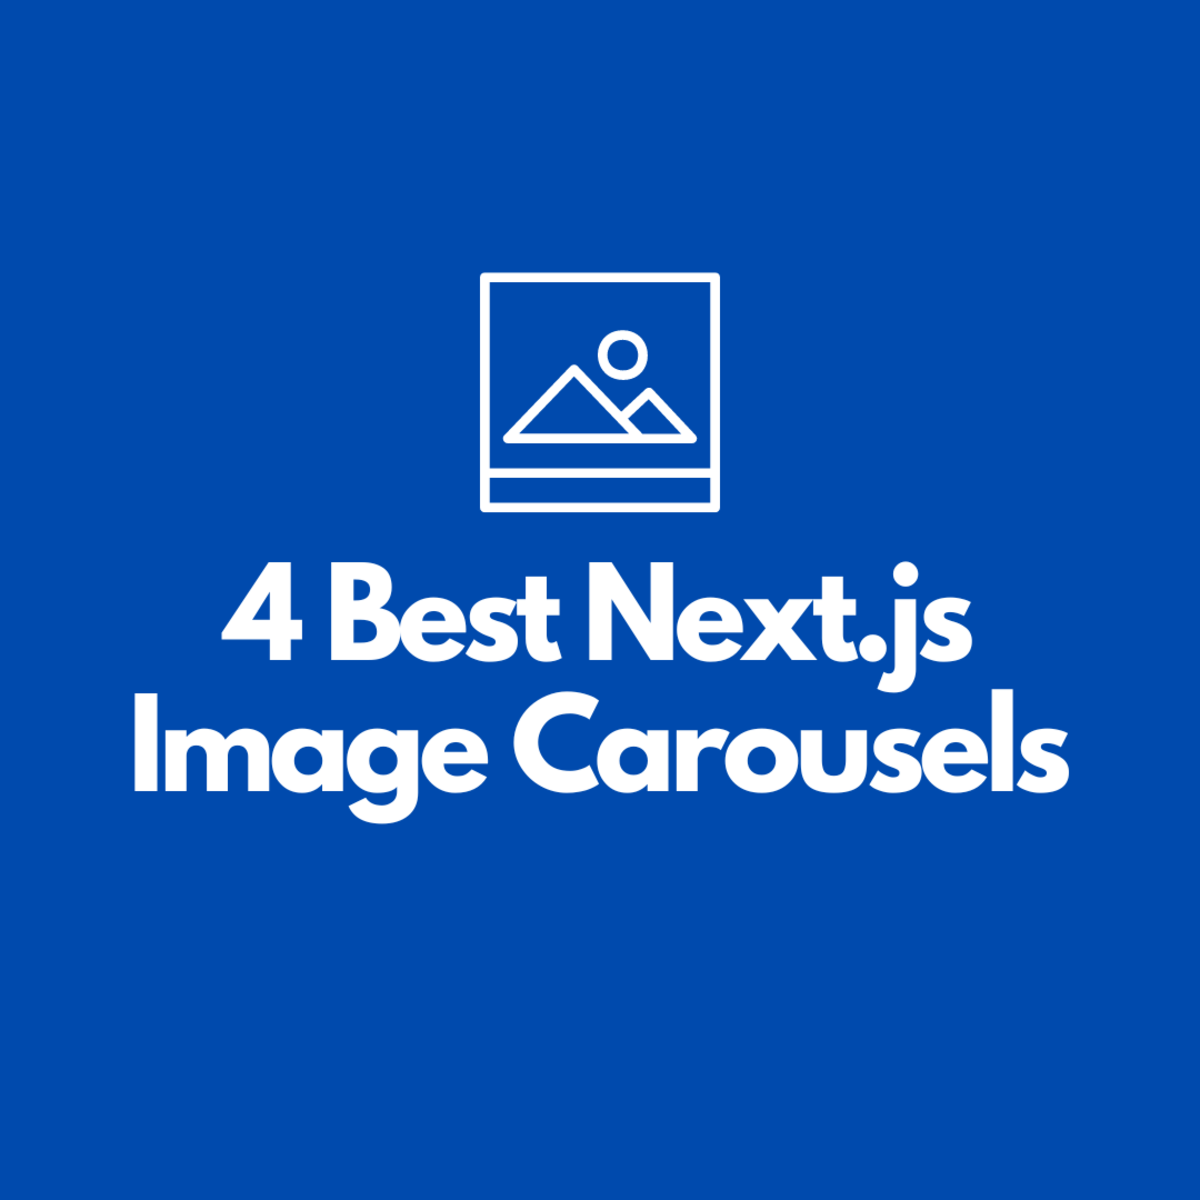 Discover the best Next.js image sliders and carousels in this ultimate list!